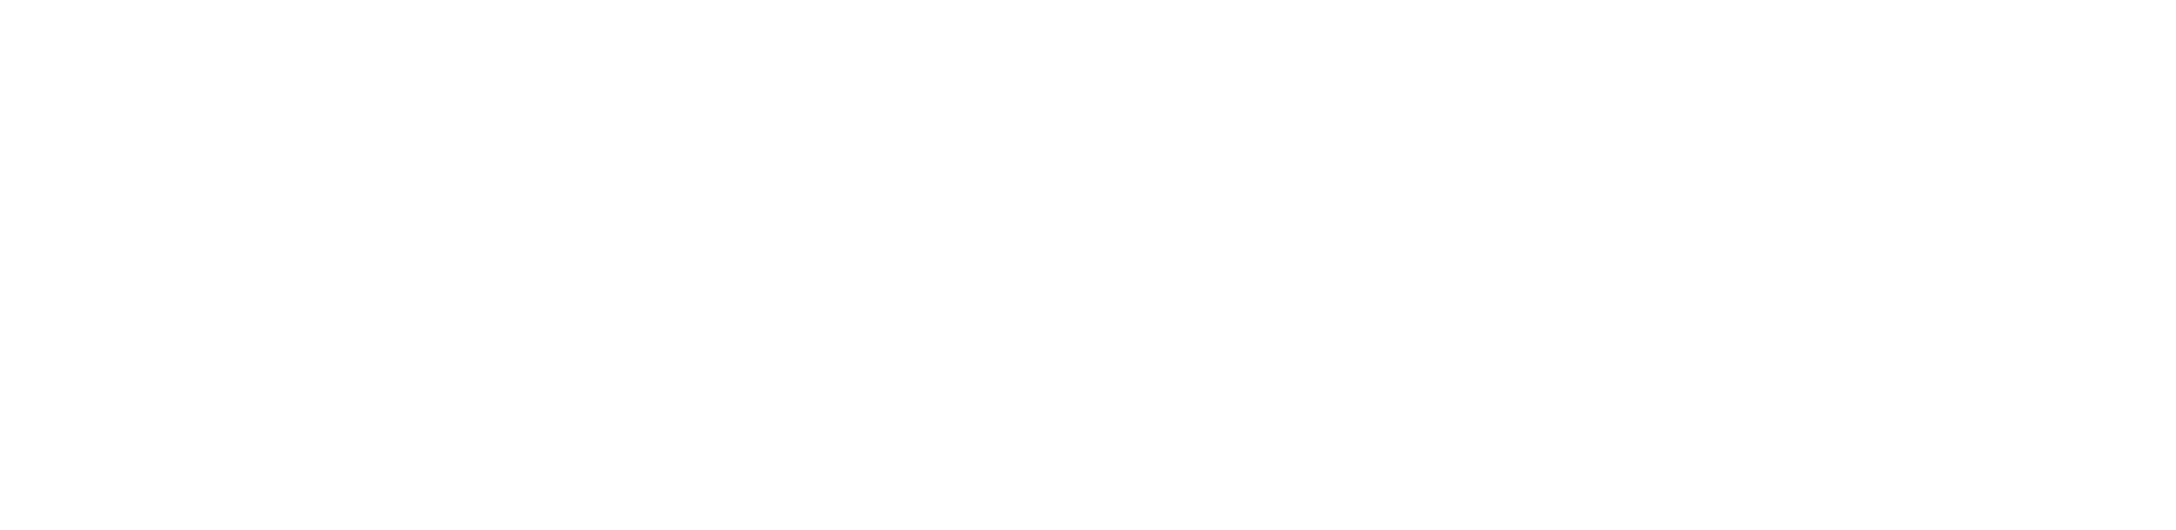 Humber Research and Innovation